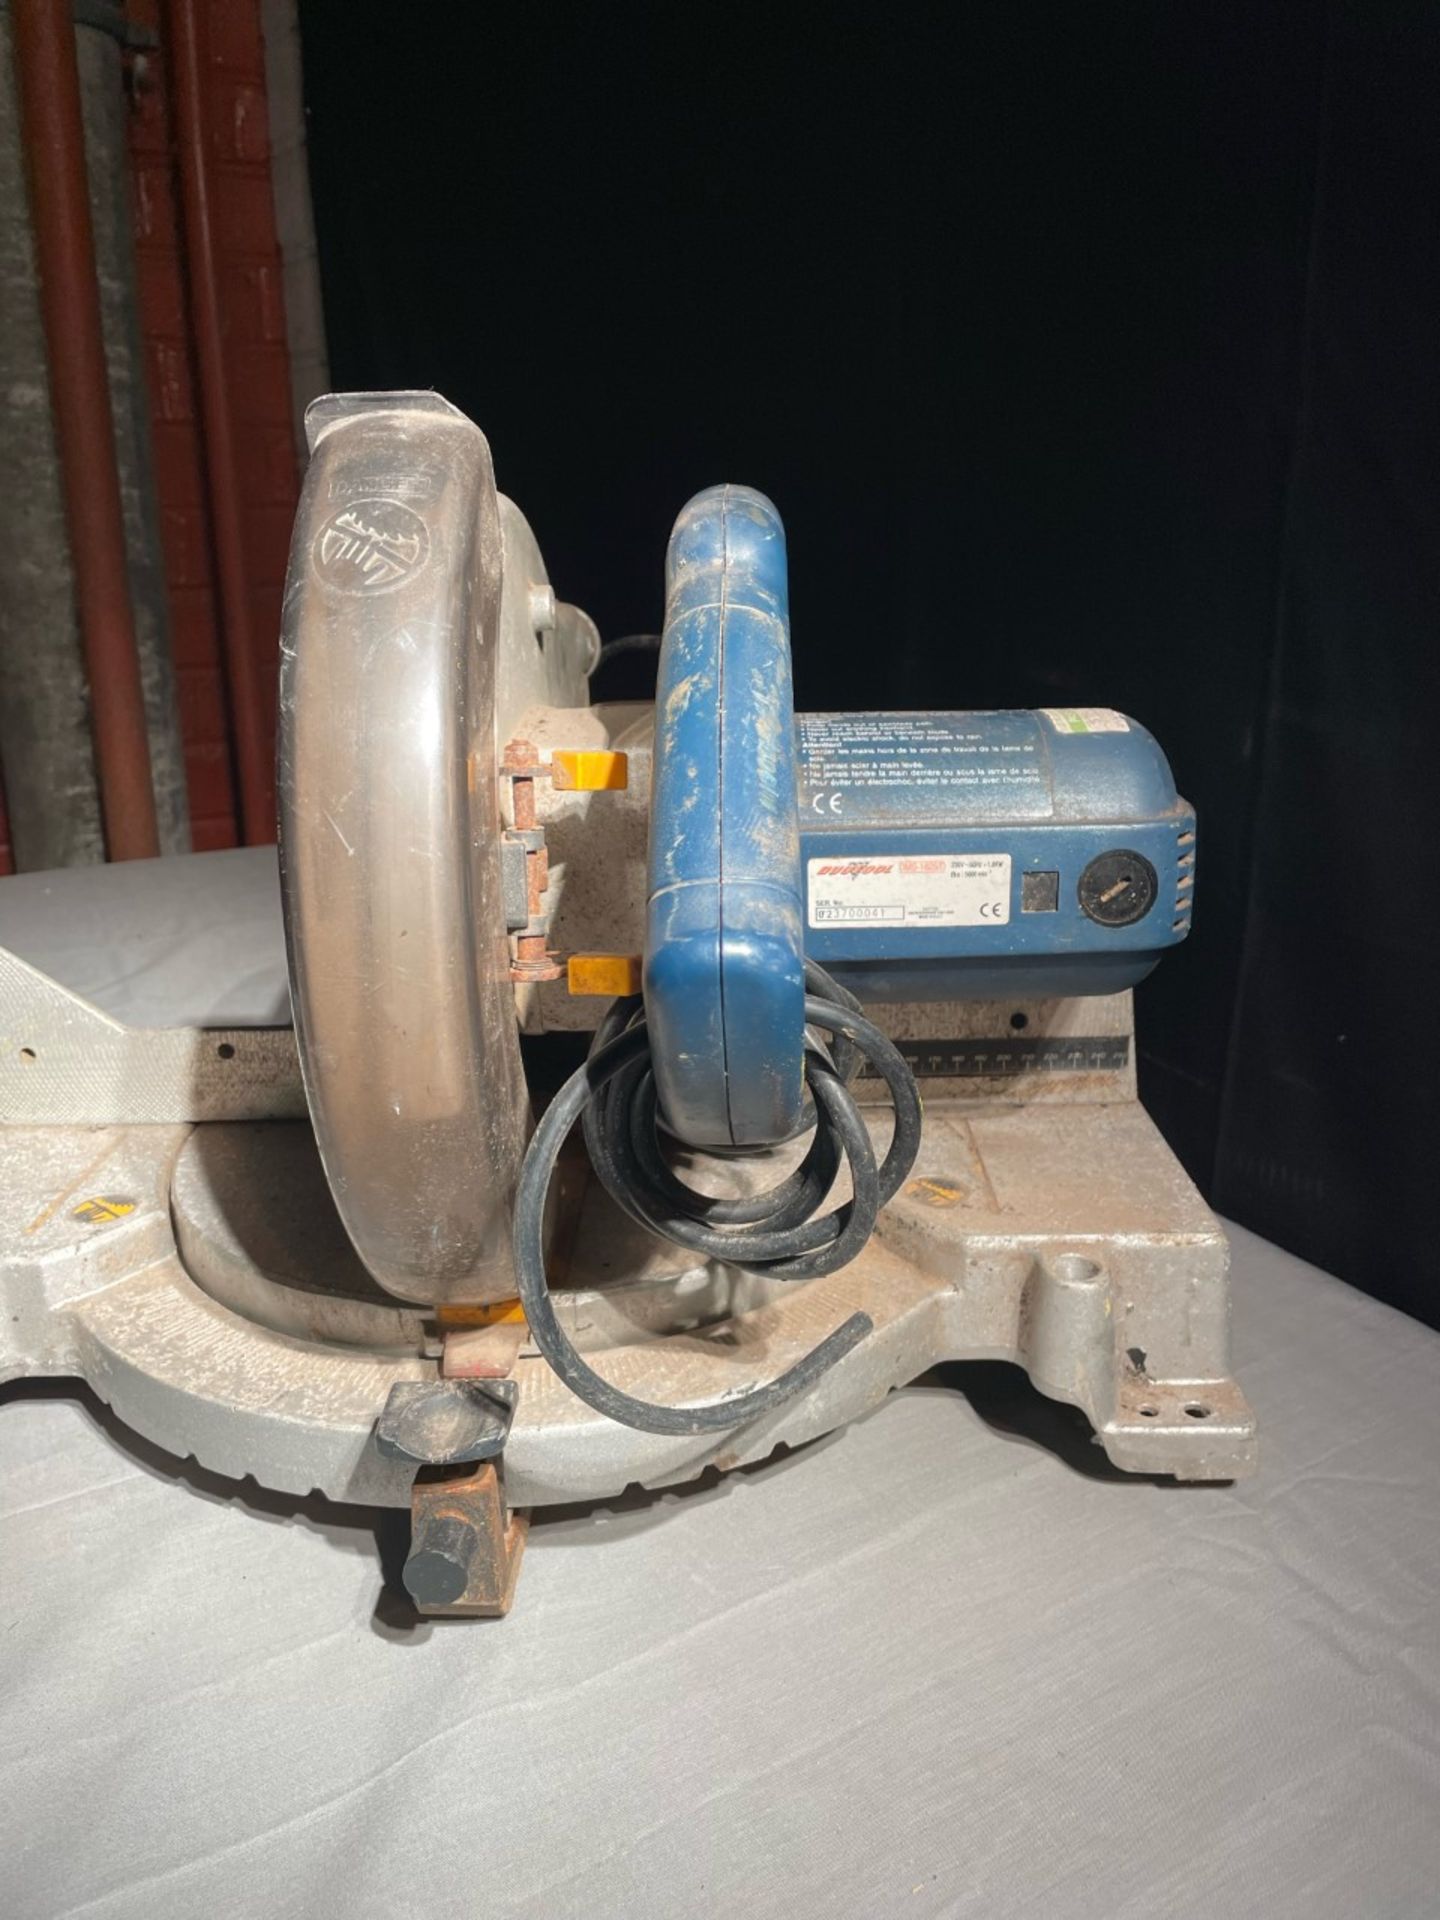 Duotool DMS 1825/D 230v mitresaw. Works but has no blade or plug attached - Image 2 of 2